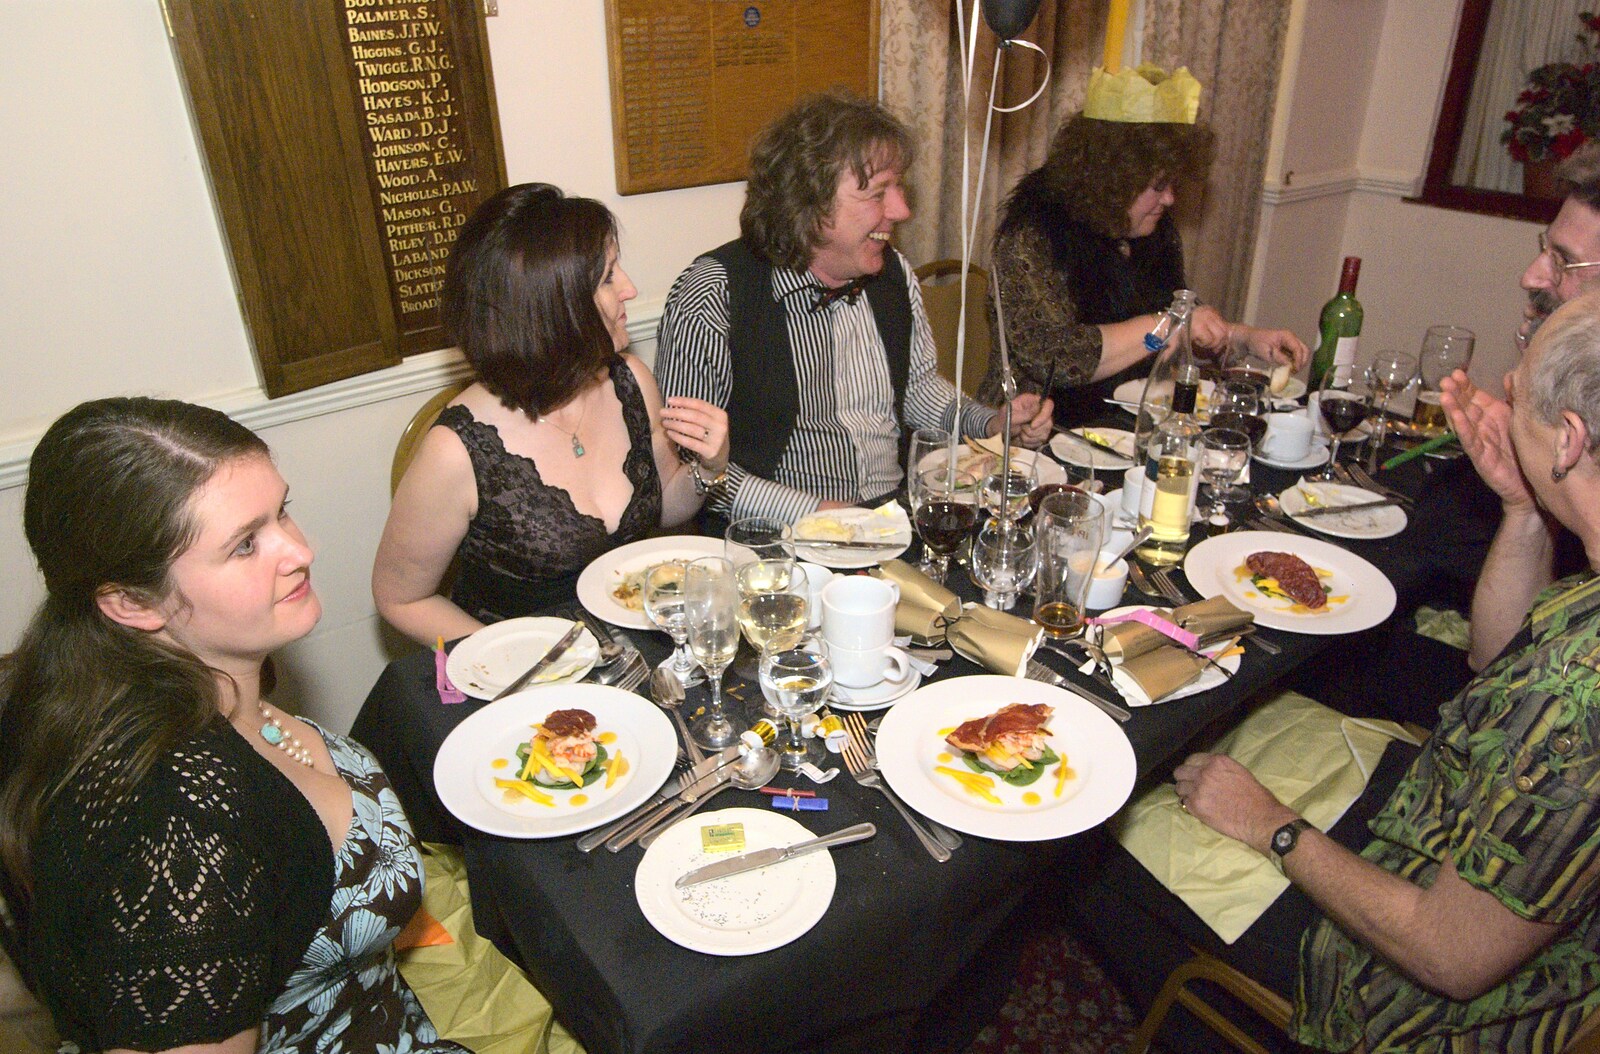 The BBs eat dinner from New Year's Eve With The BBs, Park Hotel, Diss, Norfolk - 31st December 2010